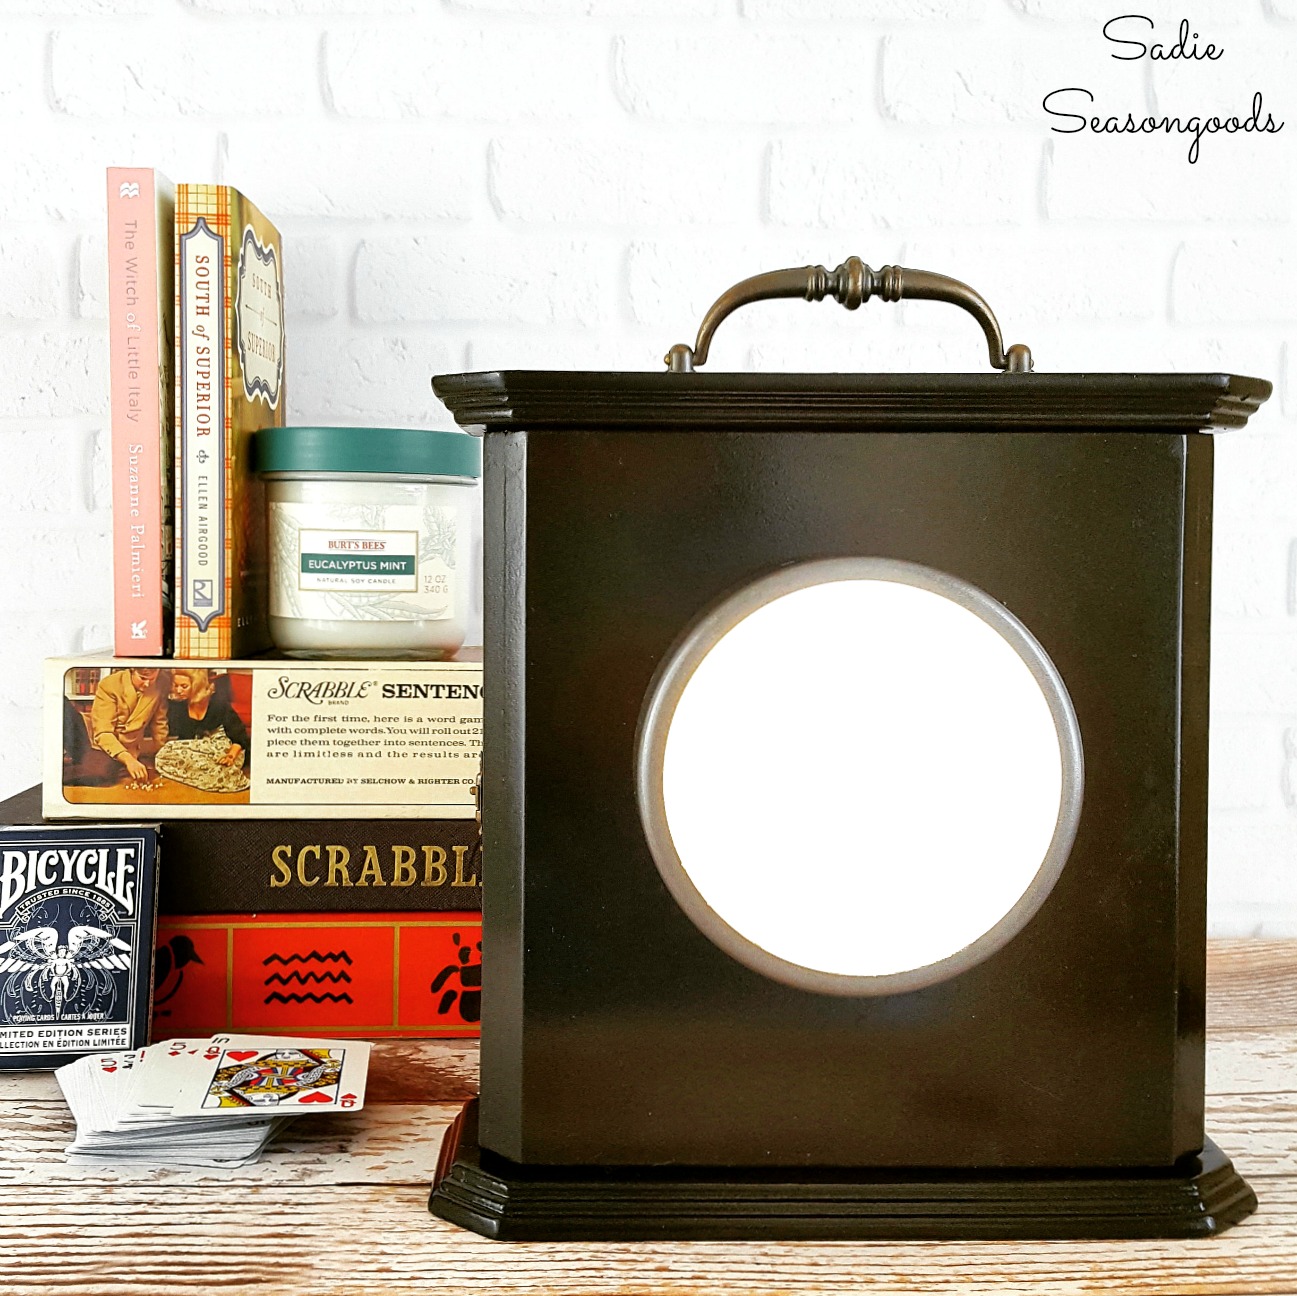 Clock Box that was upcycled into a power outage kit and emergency lamp that is filled with supplies and looks like a vintage lantern